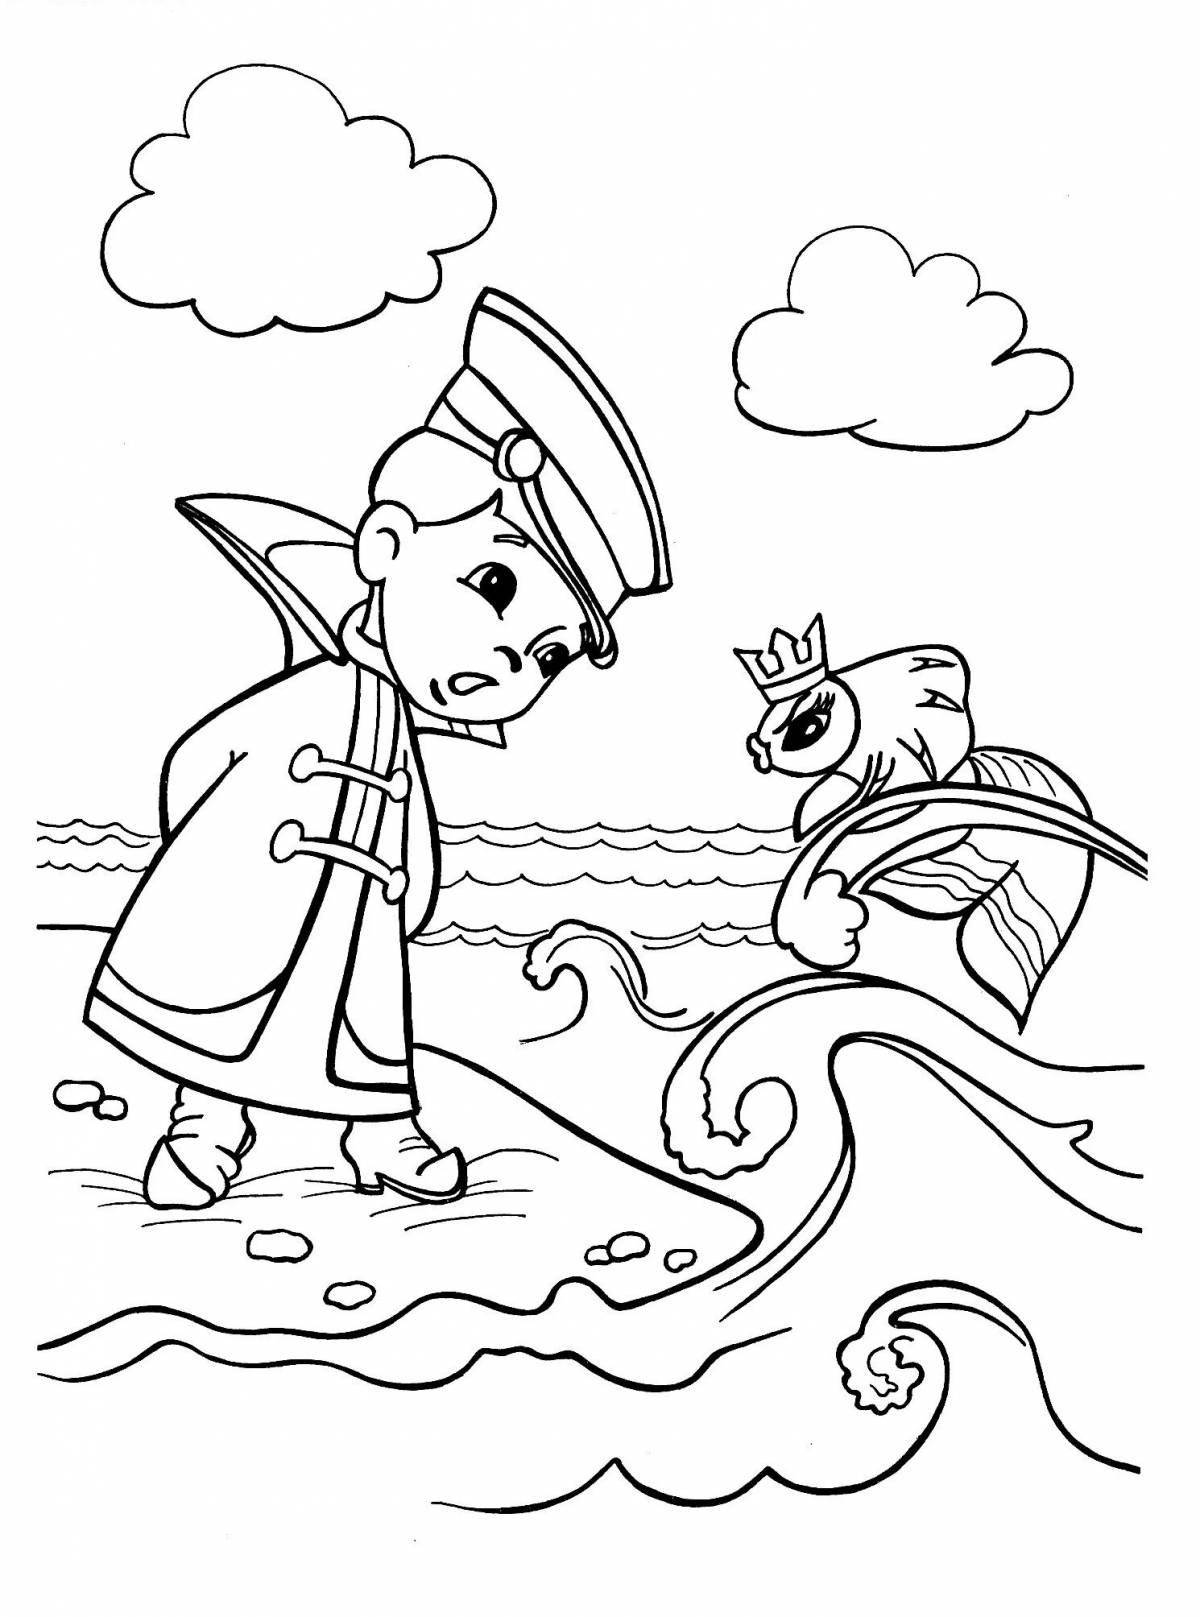 Exotic coloring book based on the tale of the fisherman and the fish drawing